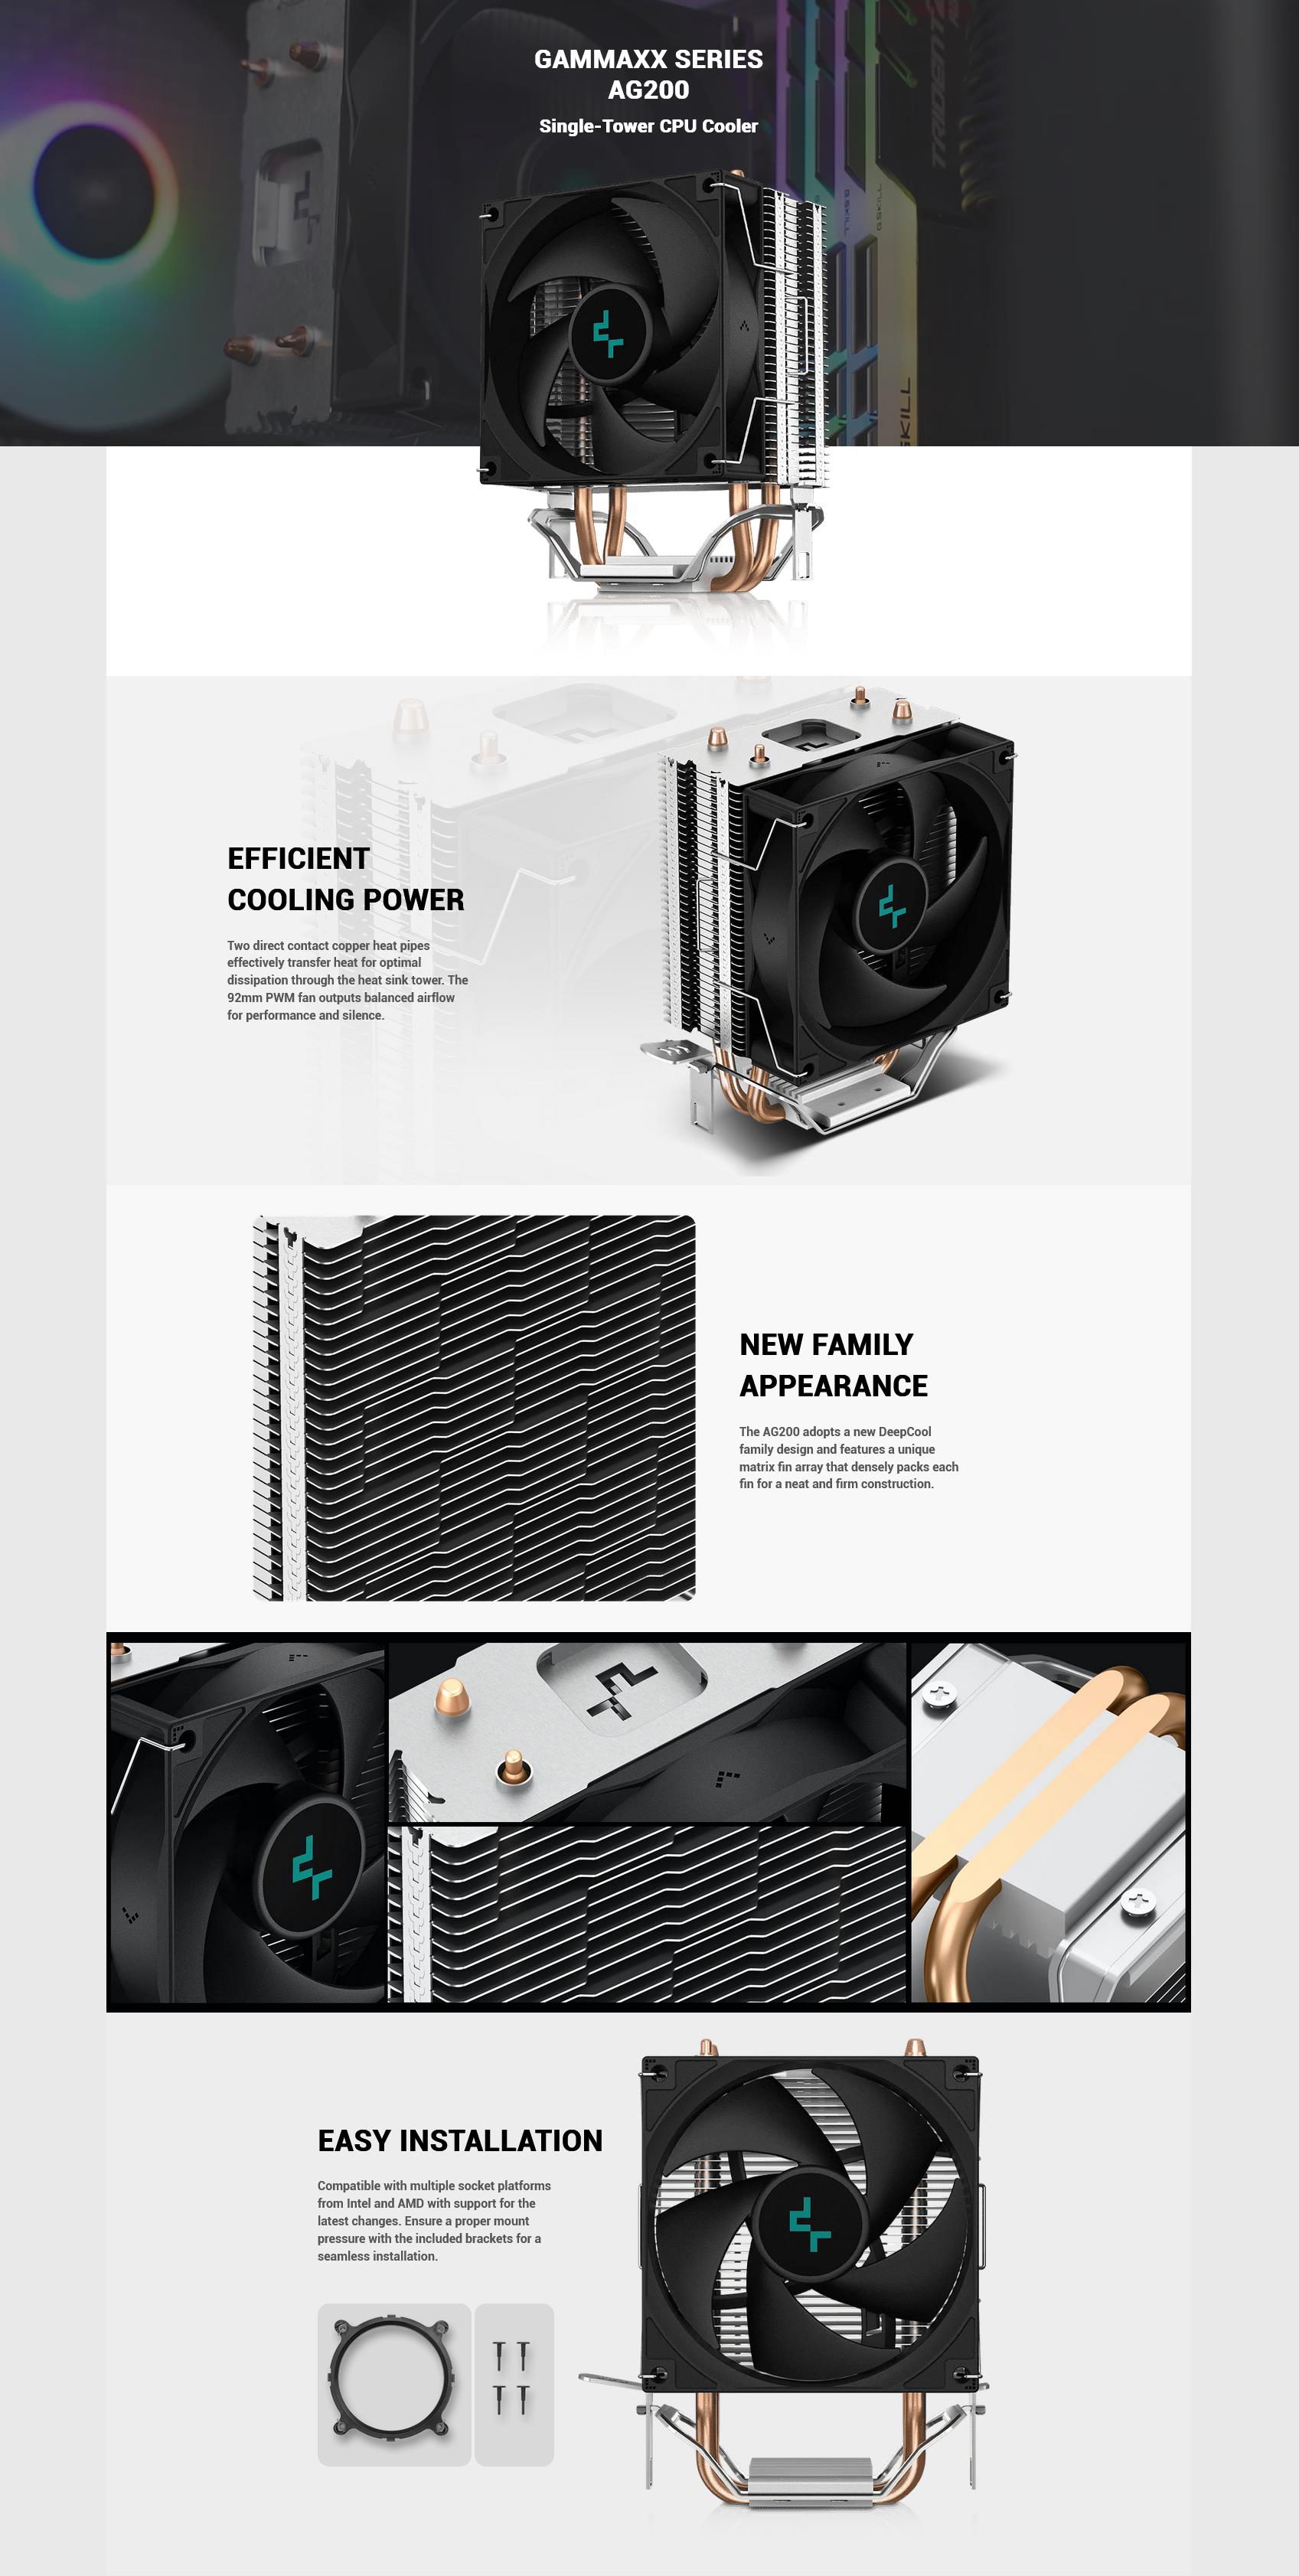 A large marketing image providing additional information about the product DeepCool AG200 CPU Cooler - Additional alt info not provided